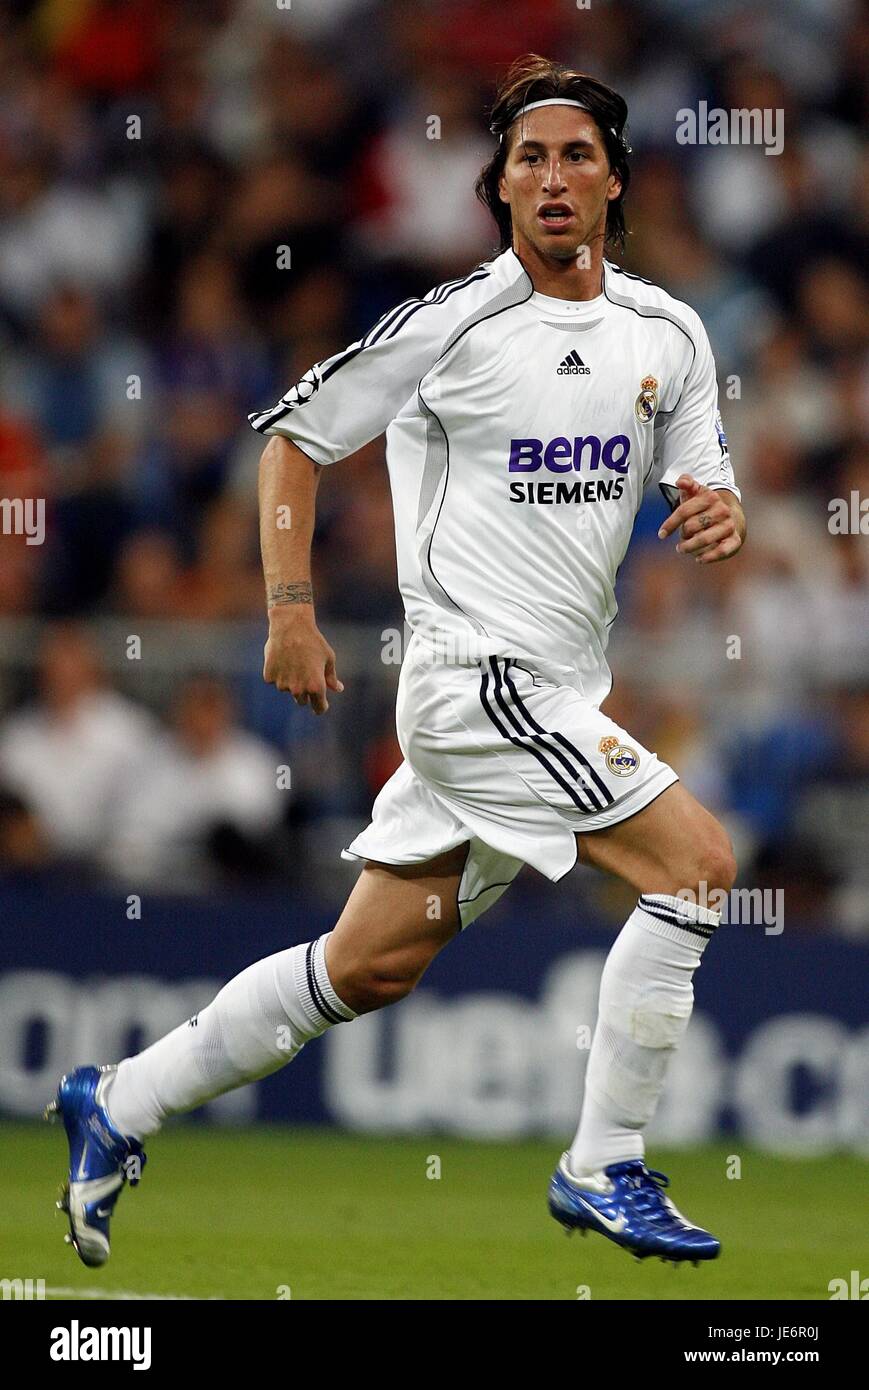 Sergio Ramos Real High Resolution Stock Photography and Images - Alamy